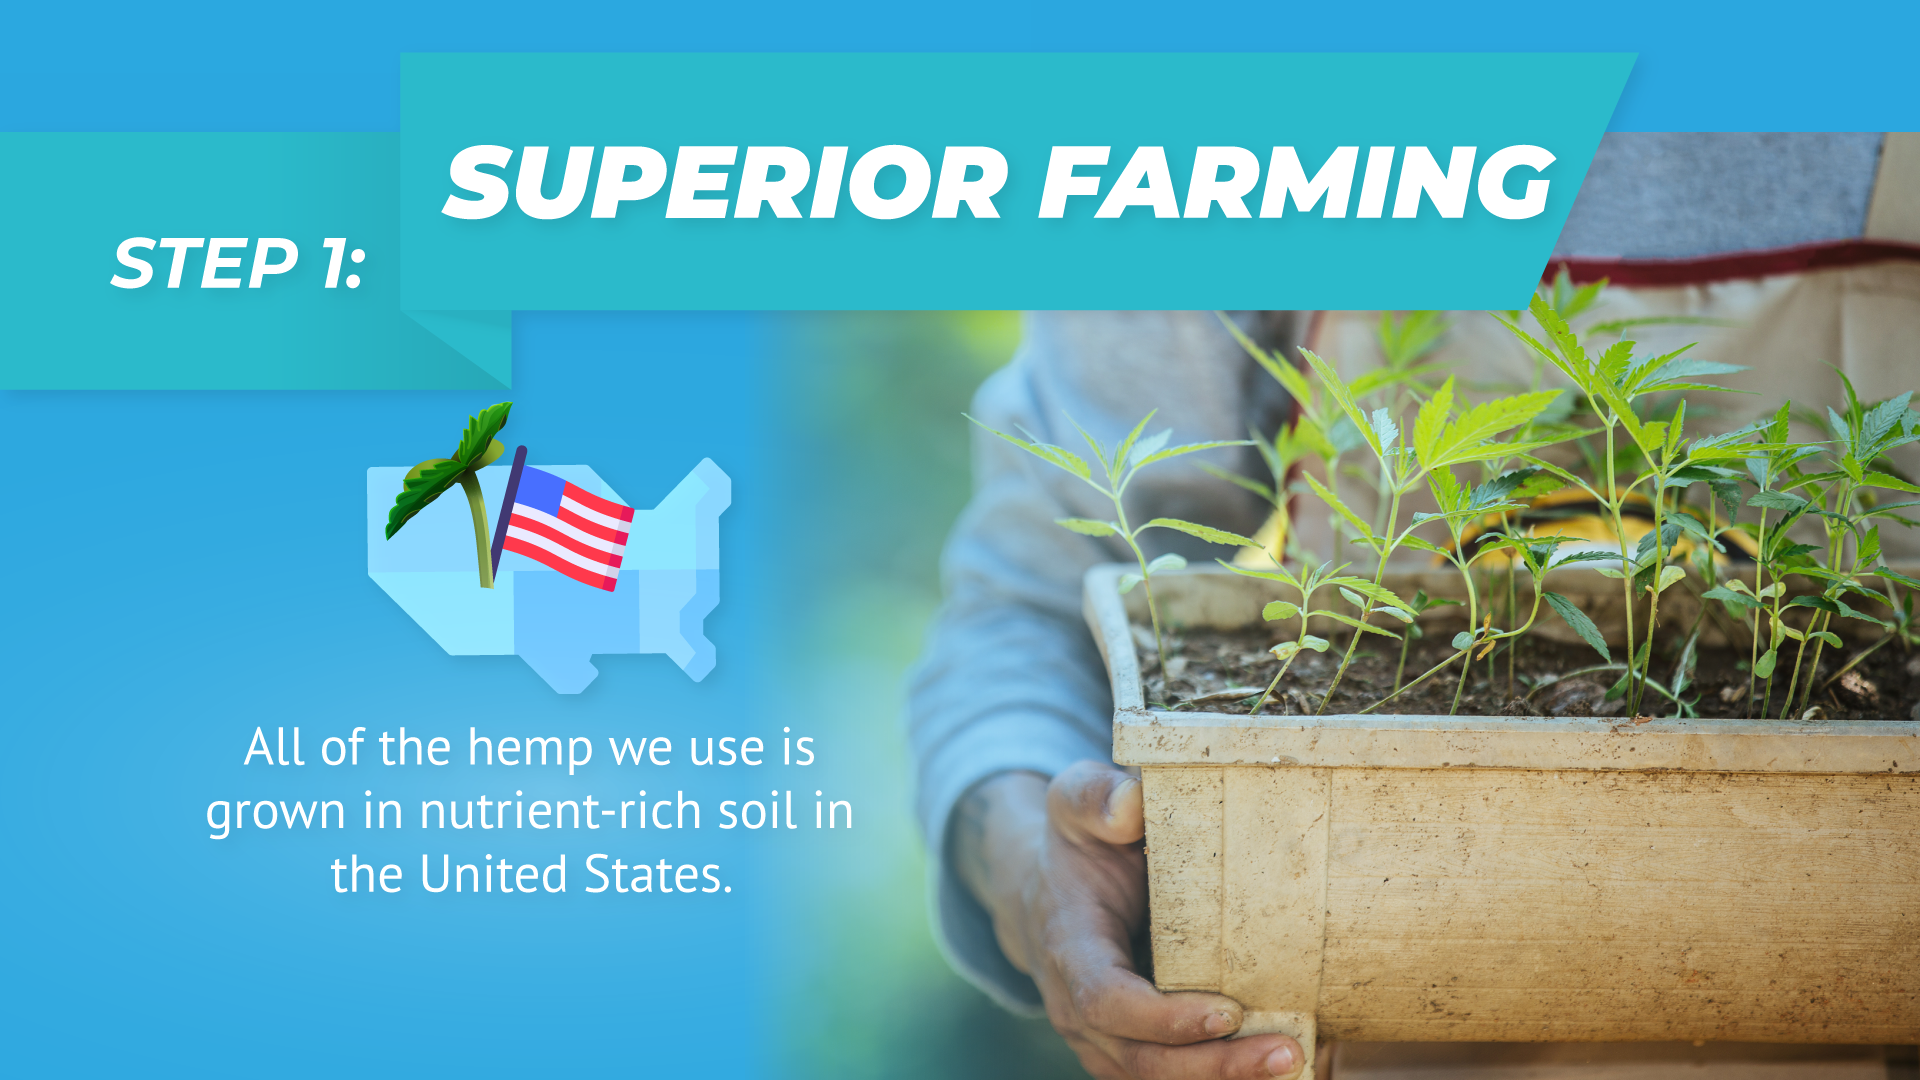 SUPERIOR FARMING All of the hemp we use is grown in nutrient-rich soil in the United States. Our farmers operate under strict guidelines; not only does this enhance the quality of our natural proprietary strains, but it also makes sure our products are safe, regulated and unsurpassed in their potency and consistency.